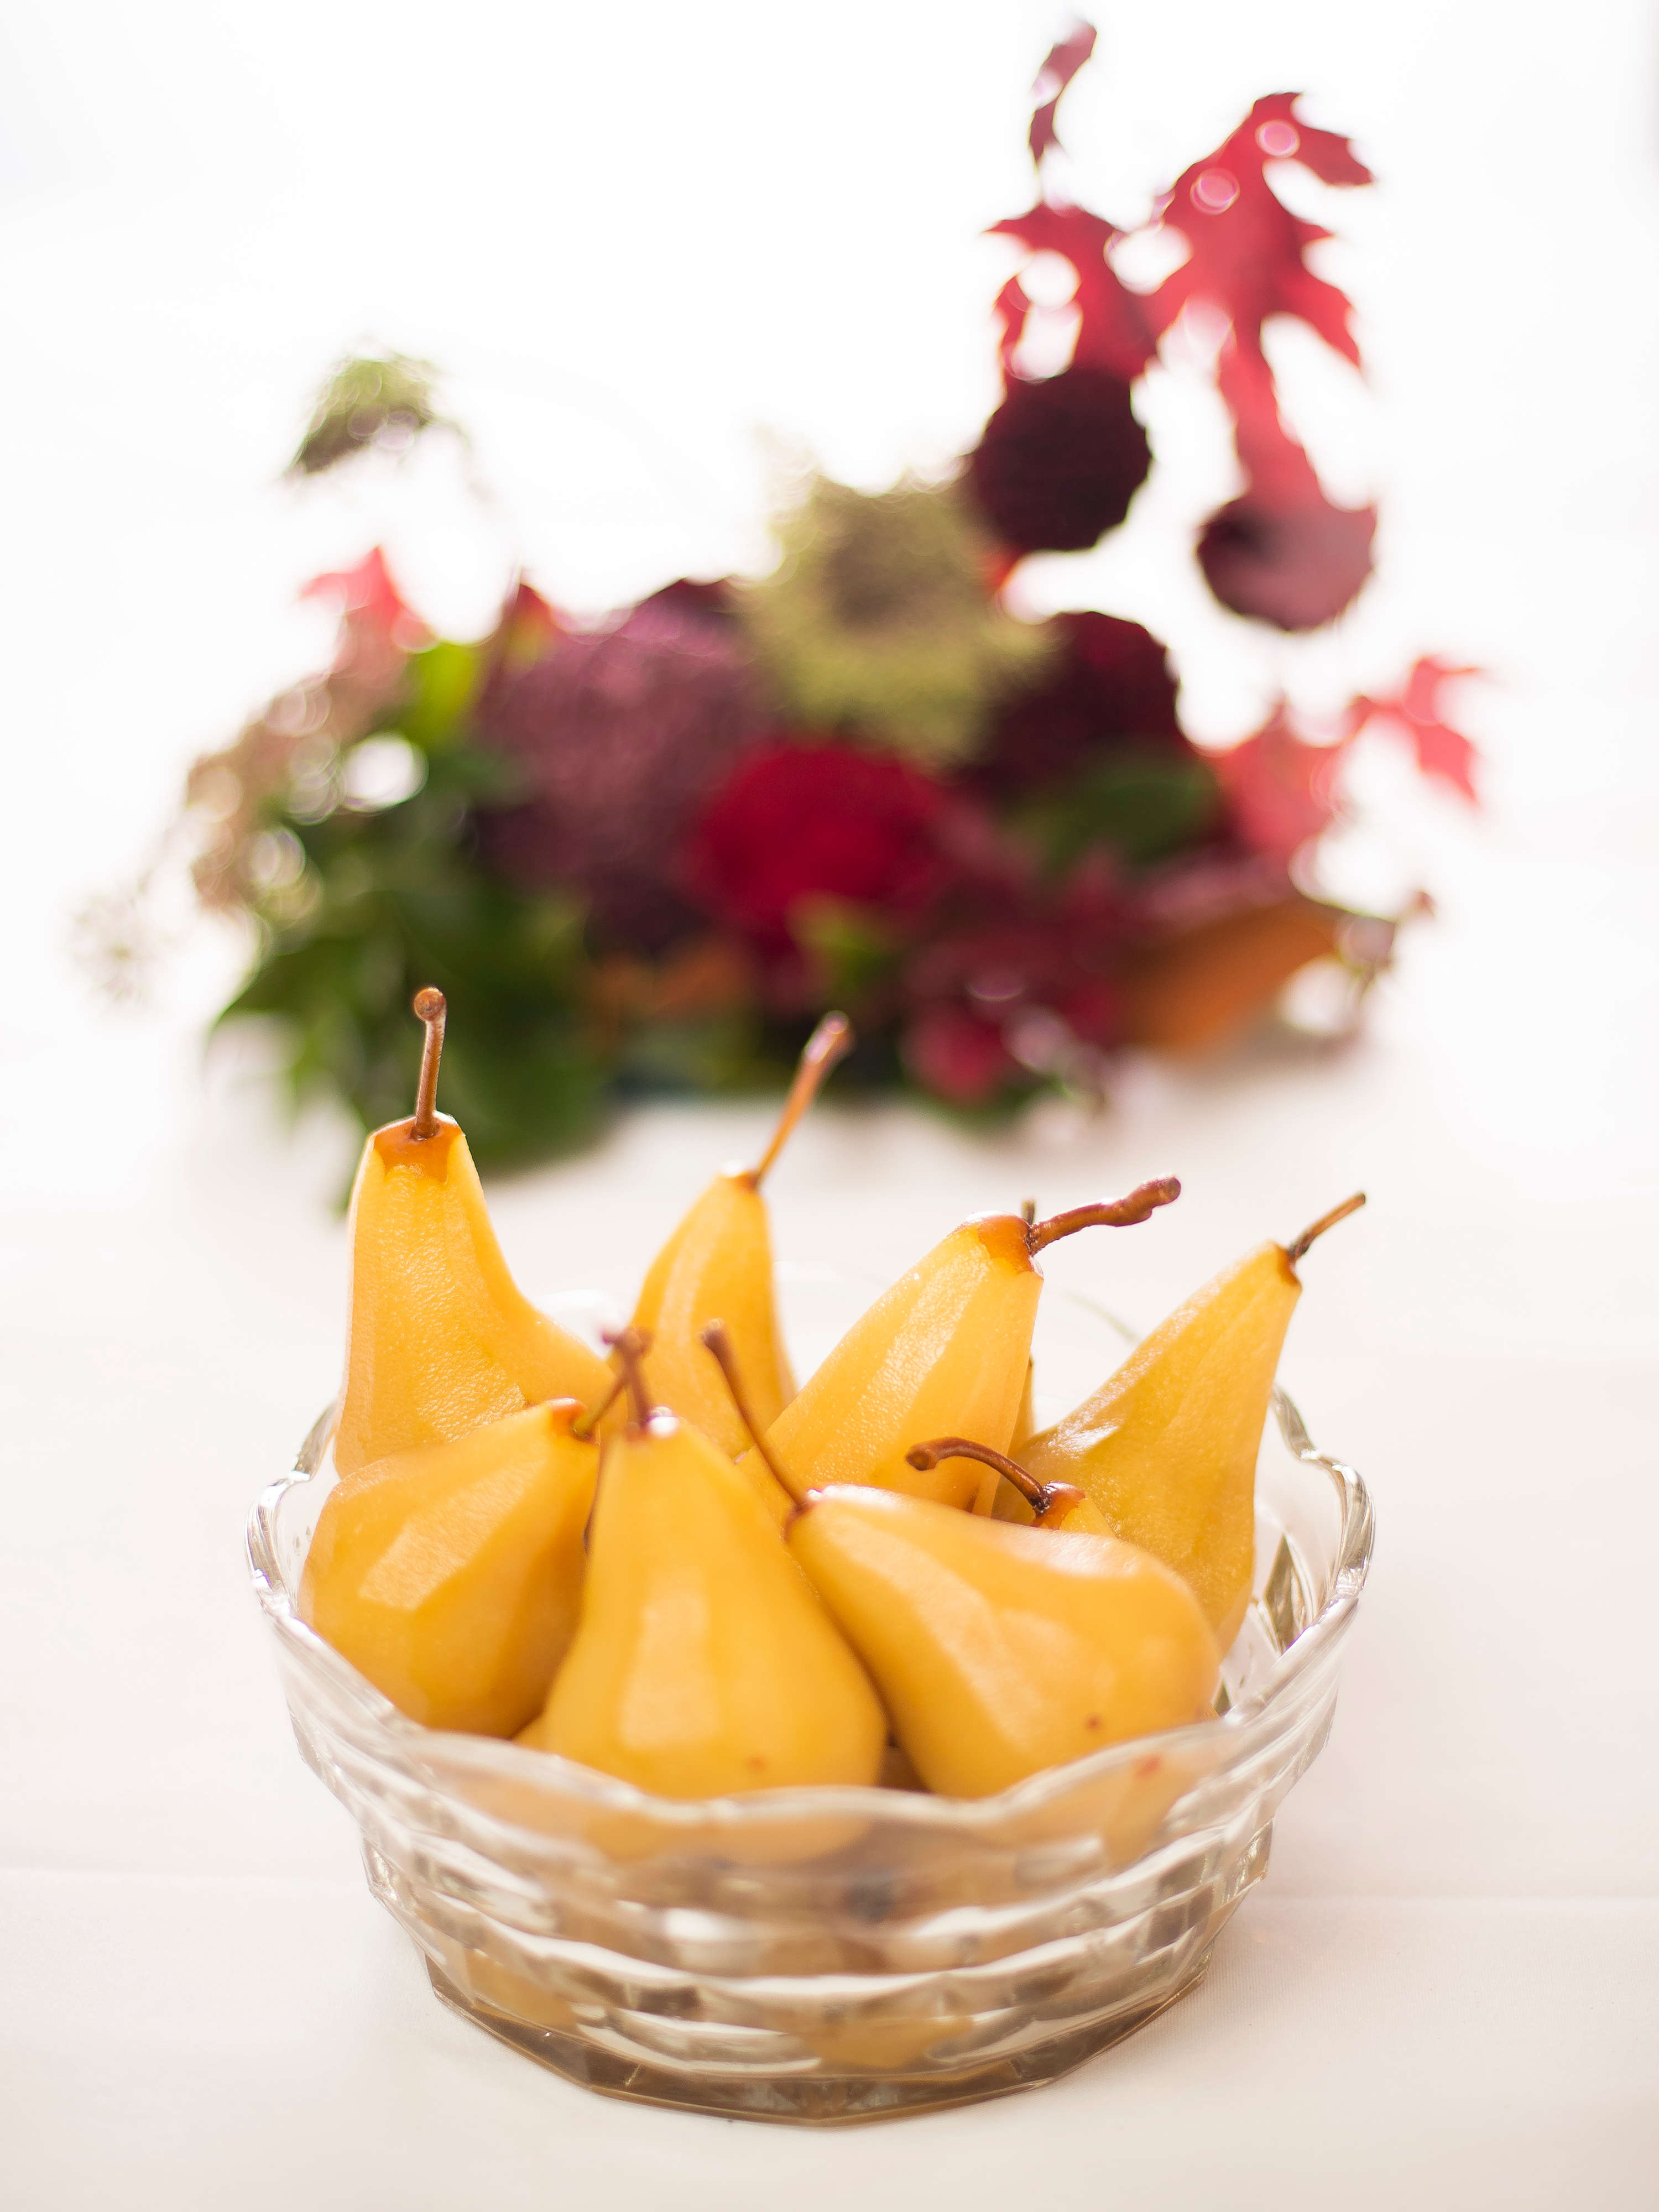 Seven pears that have been poached in saffron syrup in a cut glass bowl. Photo: Richard Jupe.